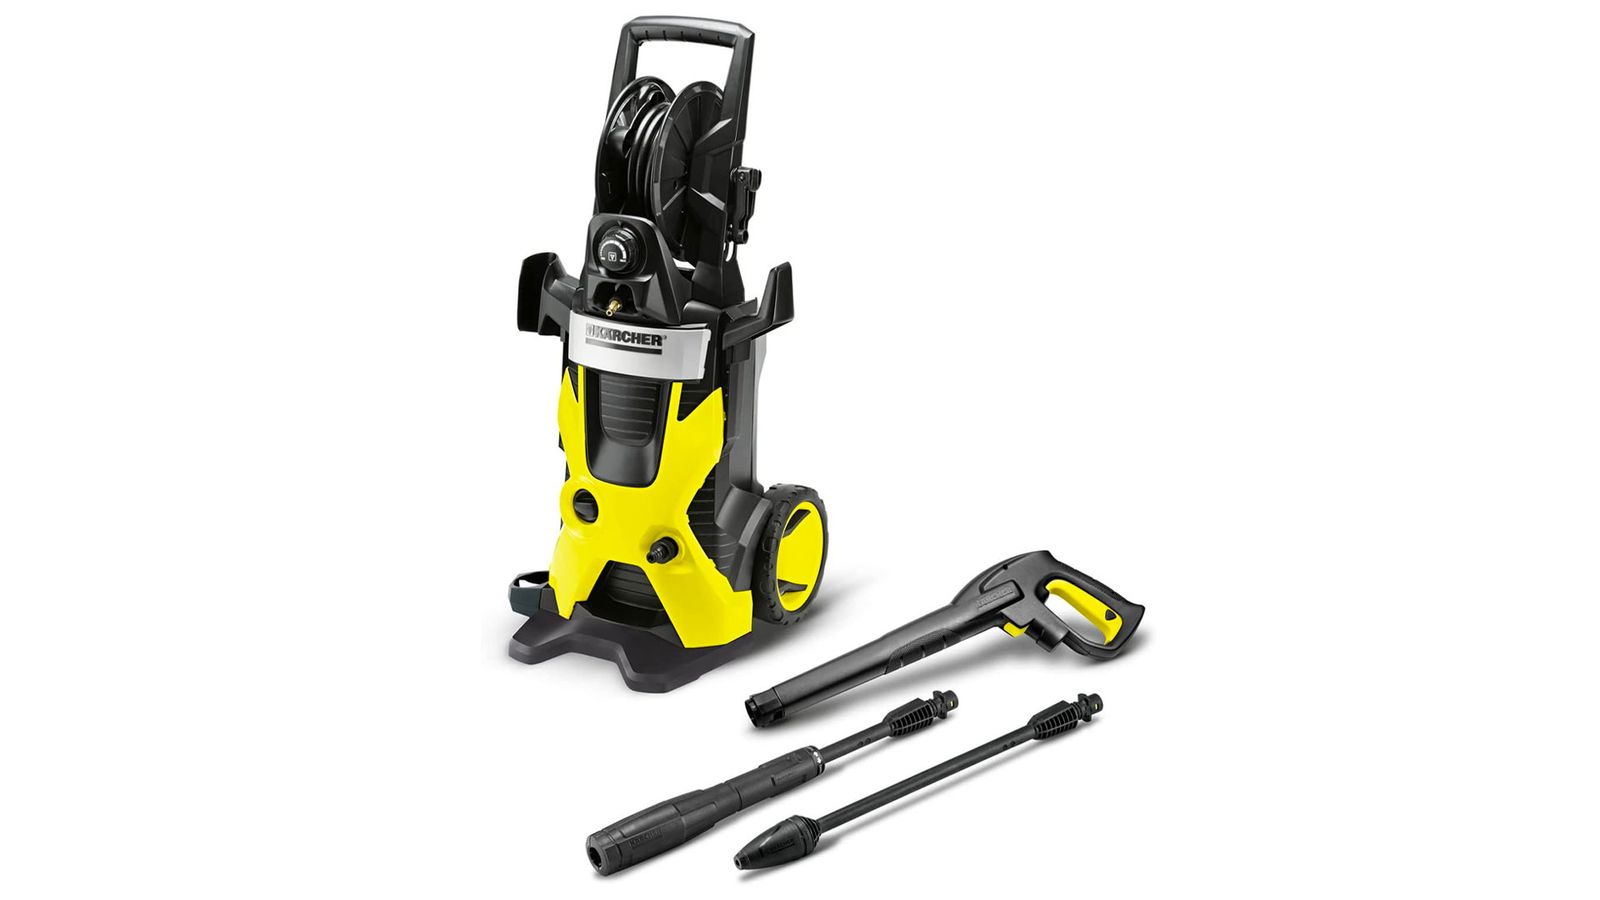 Karcher K 5 Premium product image of a yellow and black machine.